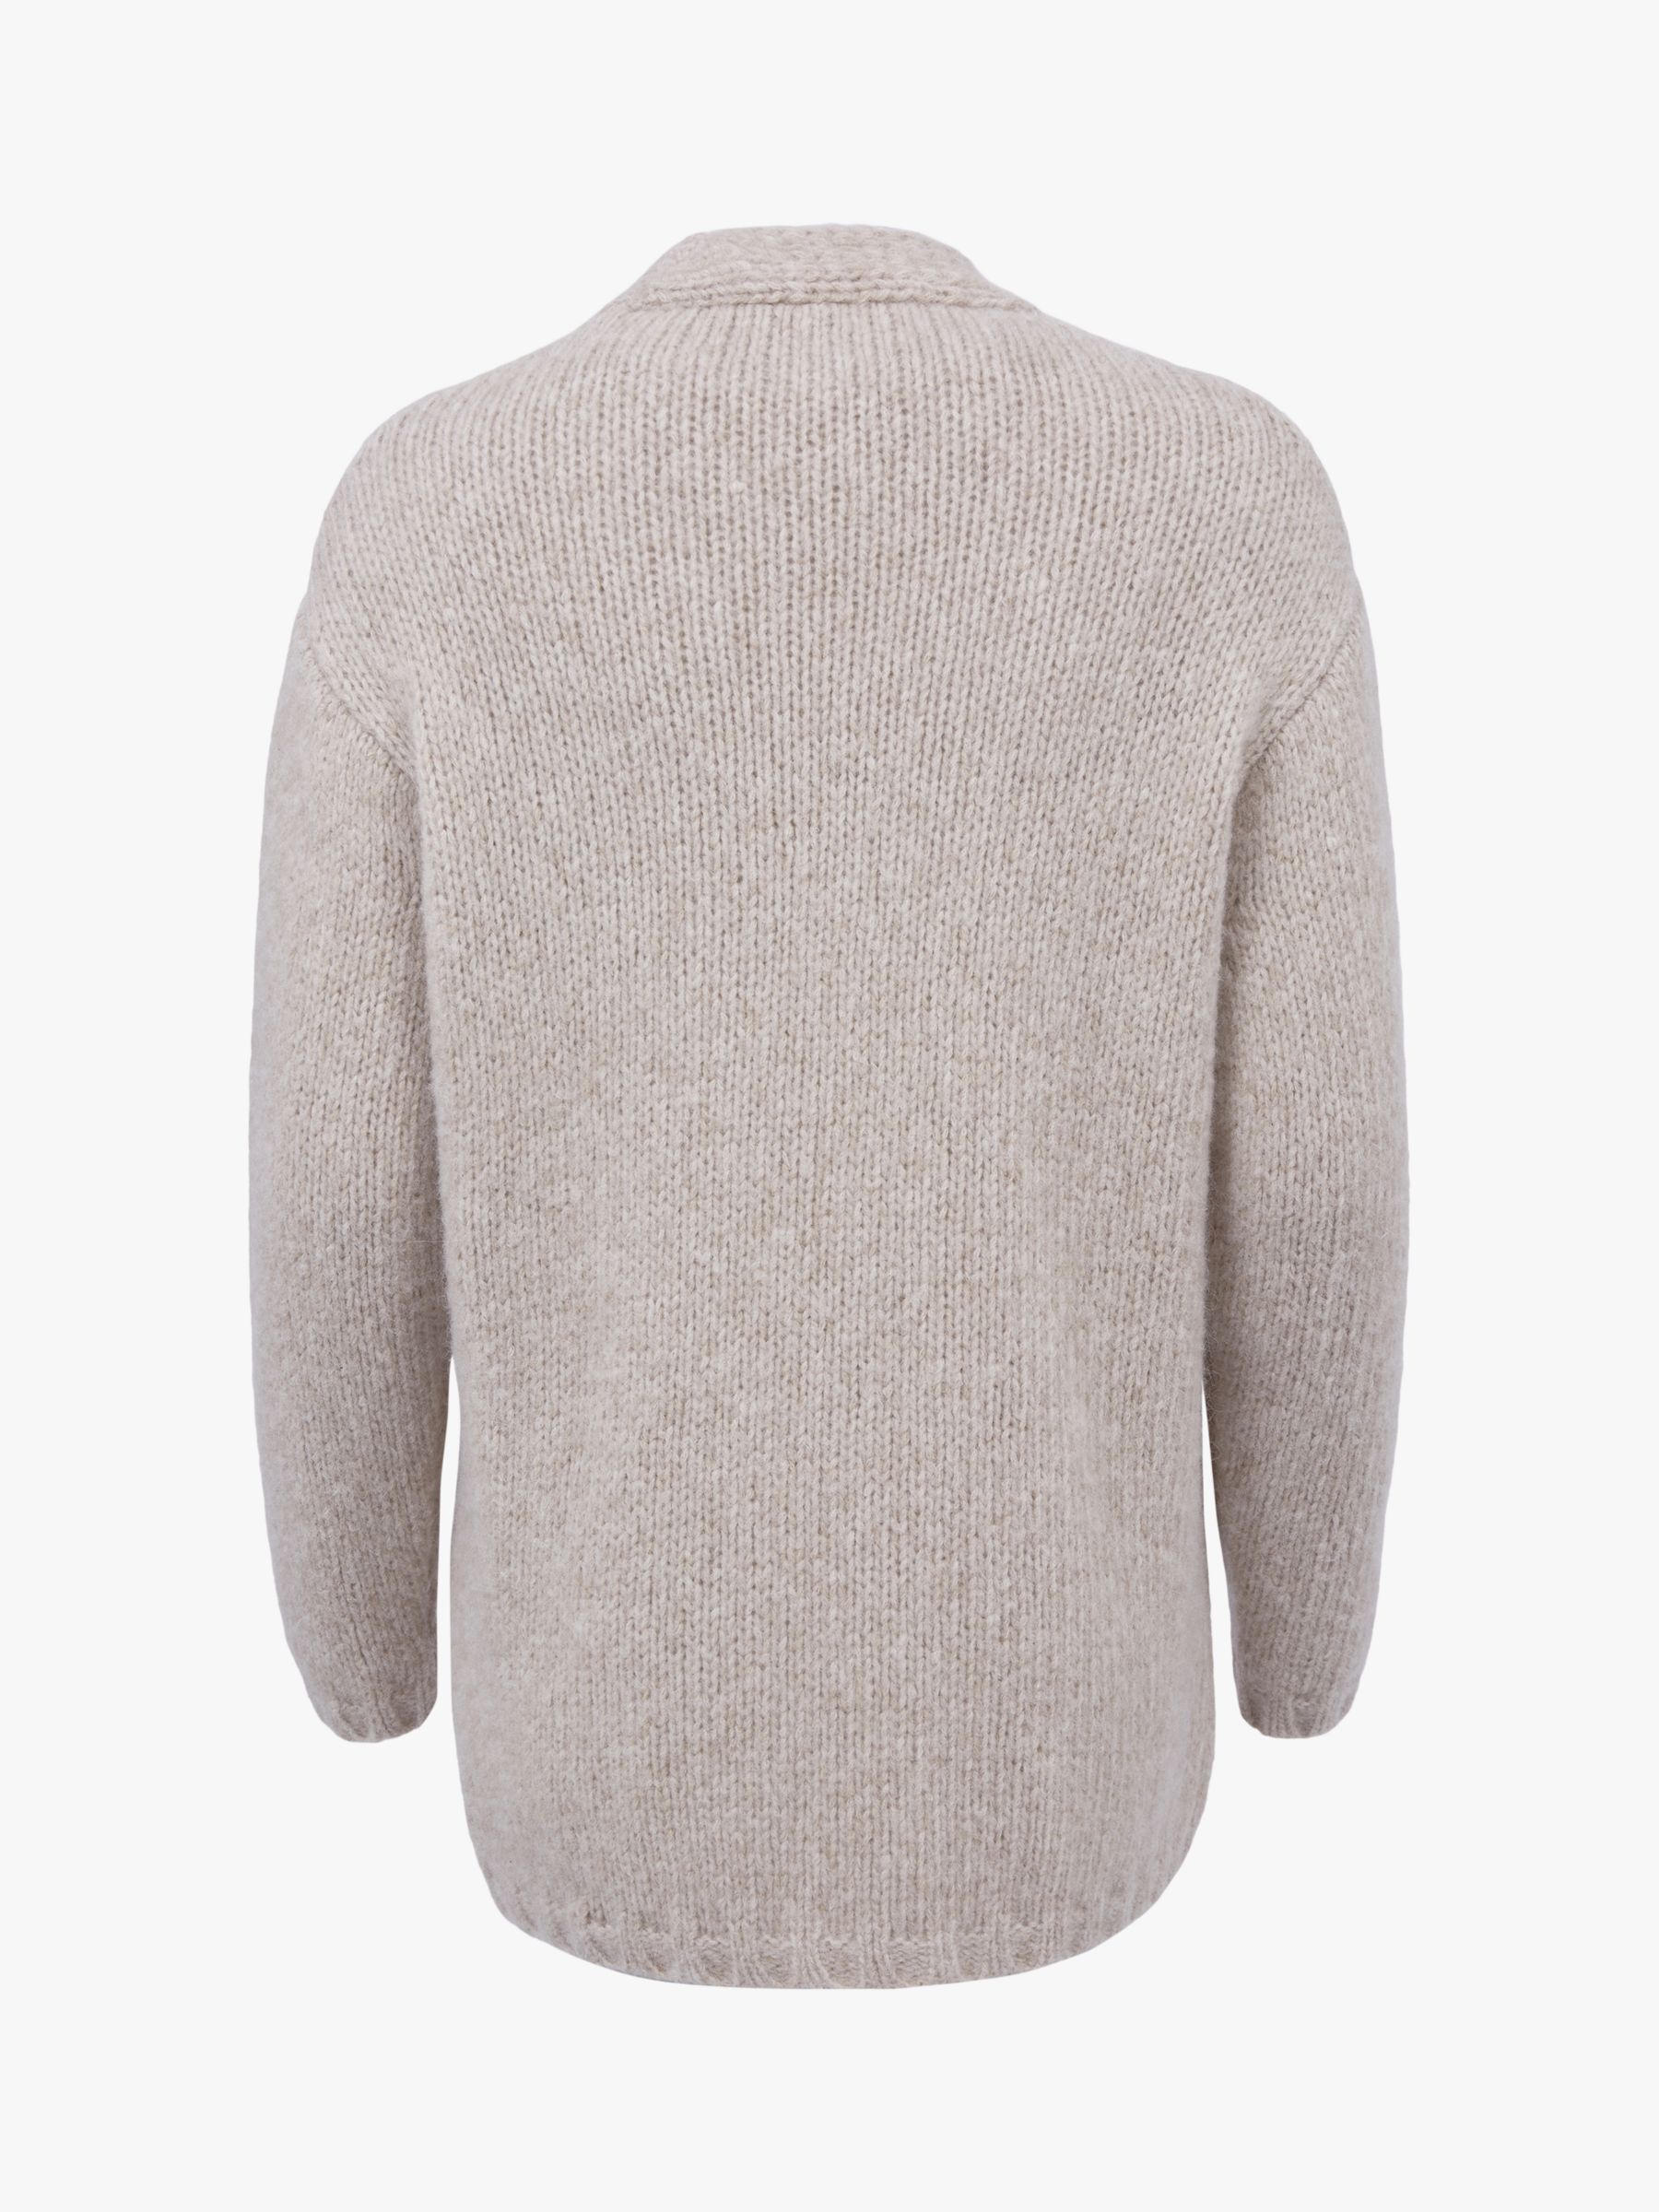 Buy Celtic & Co. Luxe Wool Blend Slouch Cardigan, Oatmeal Online at johnlewis.com